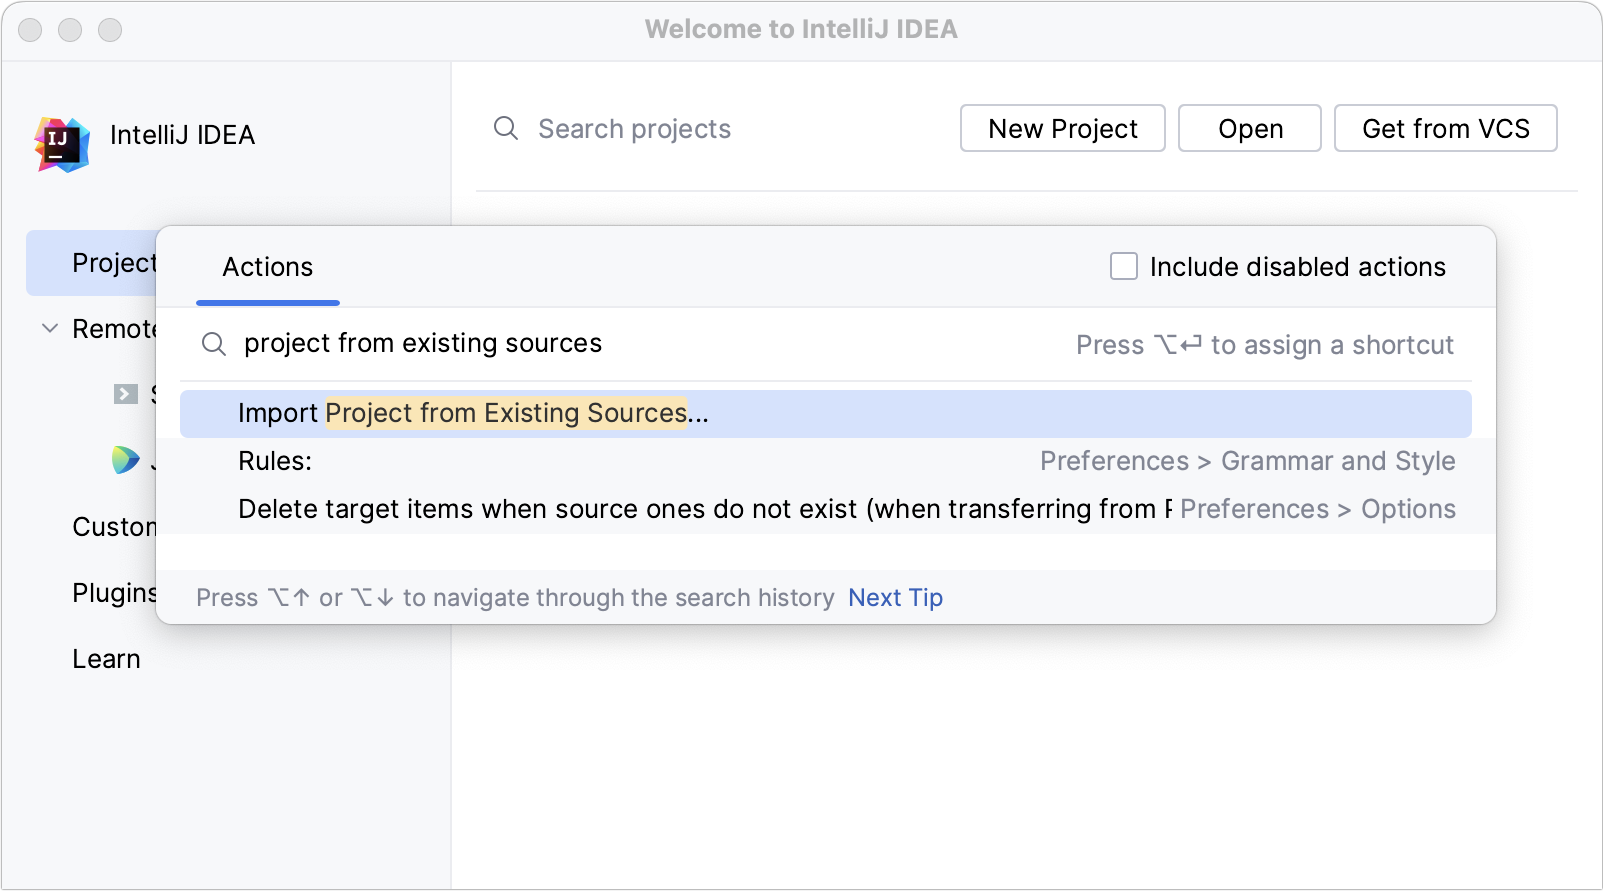 Importing a project from existing sources